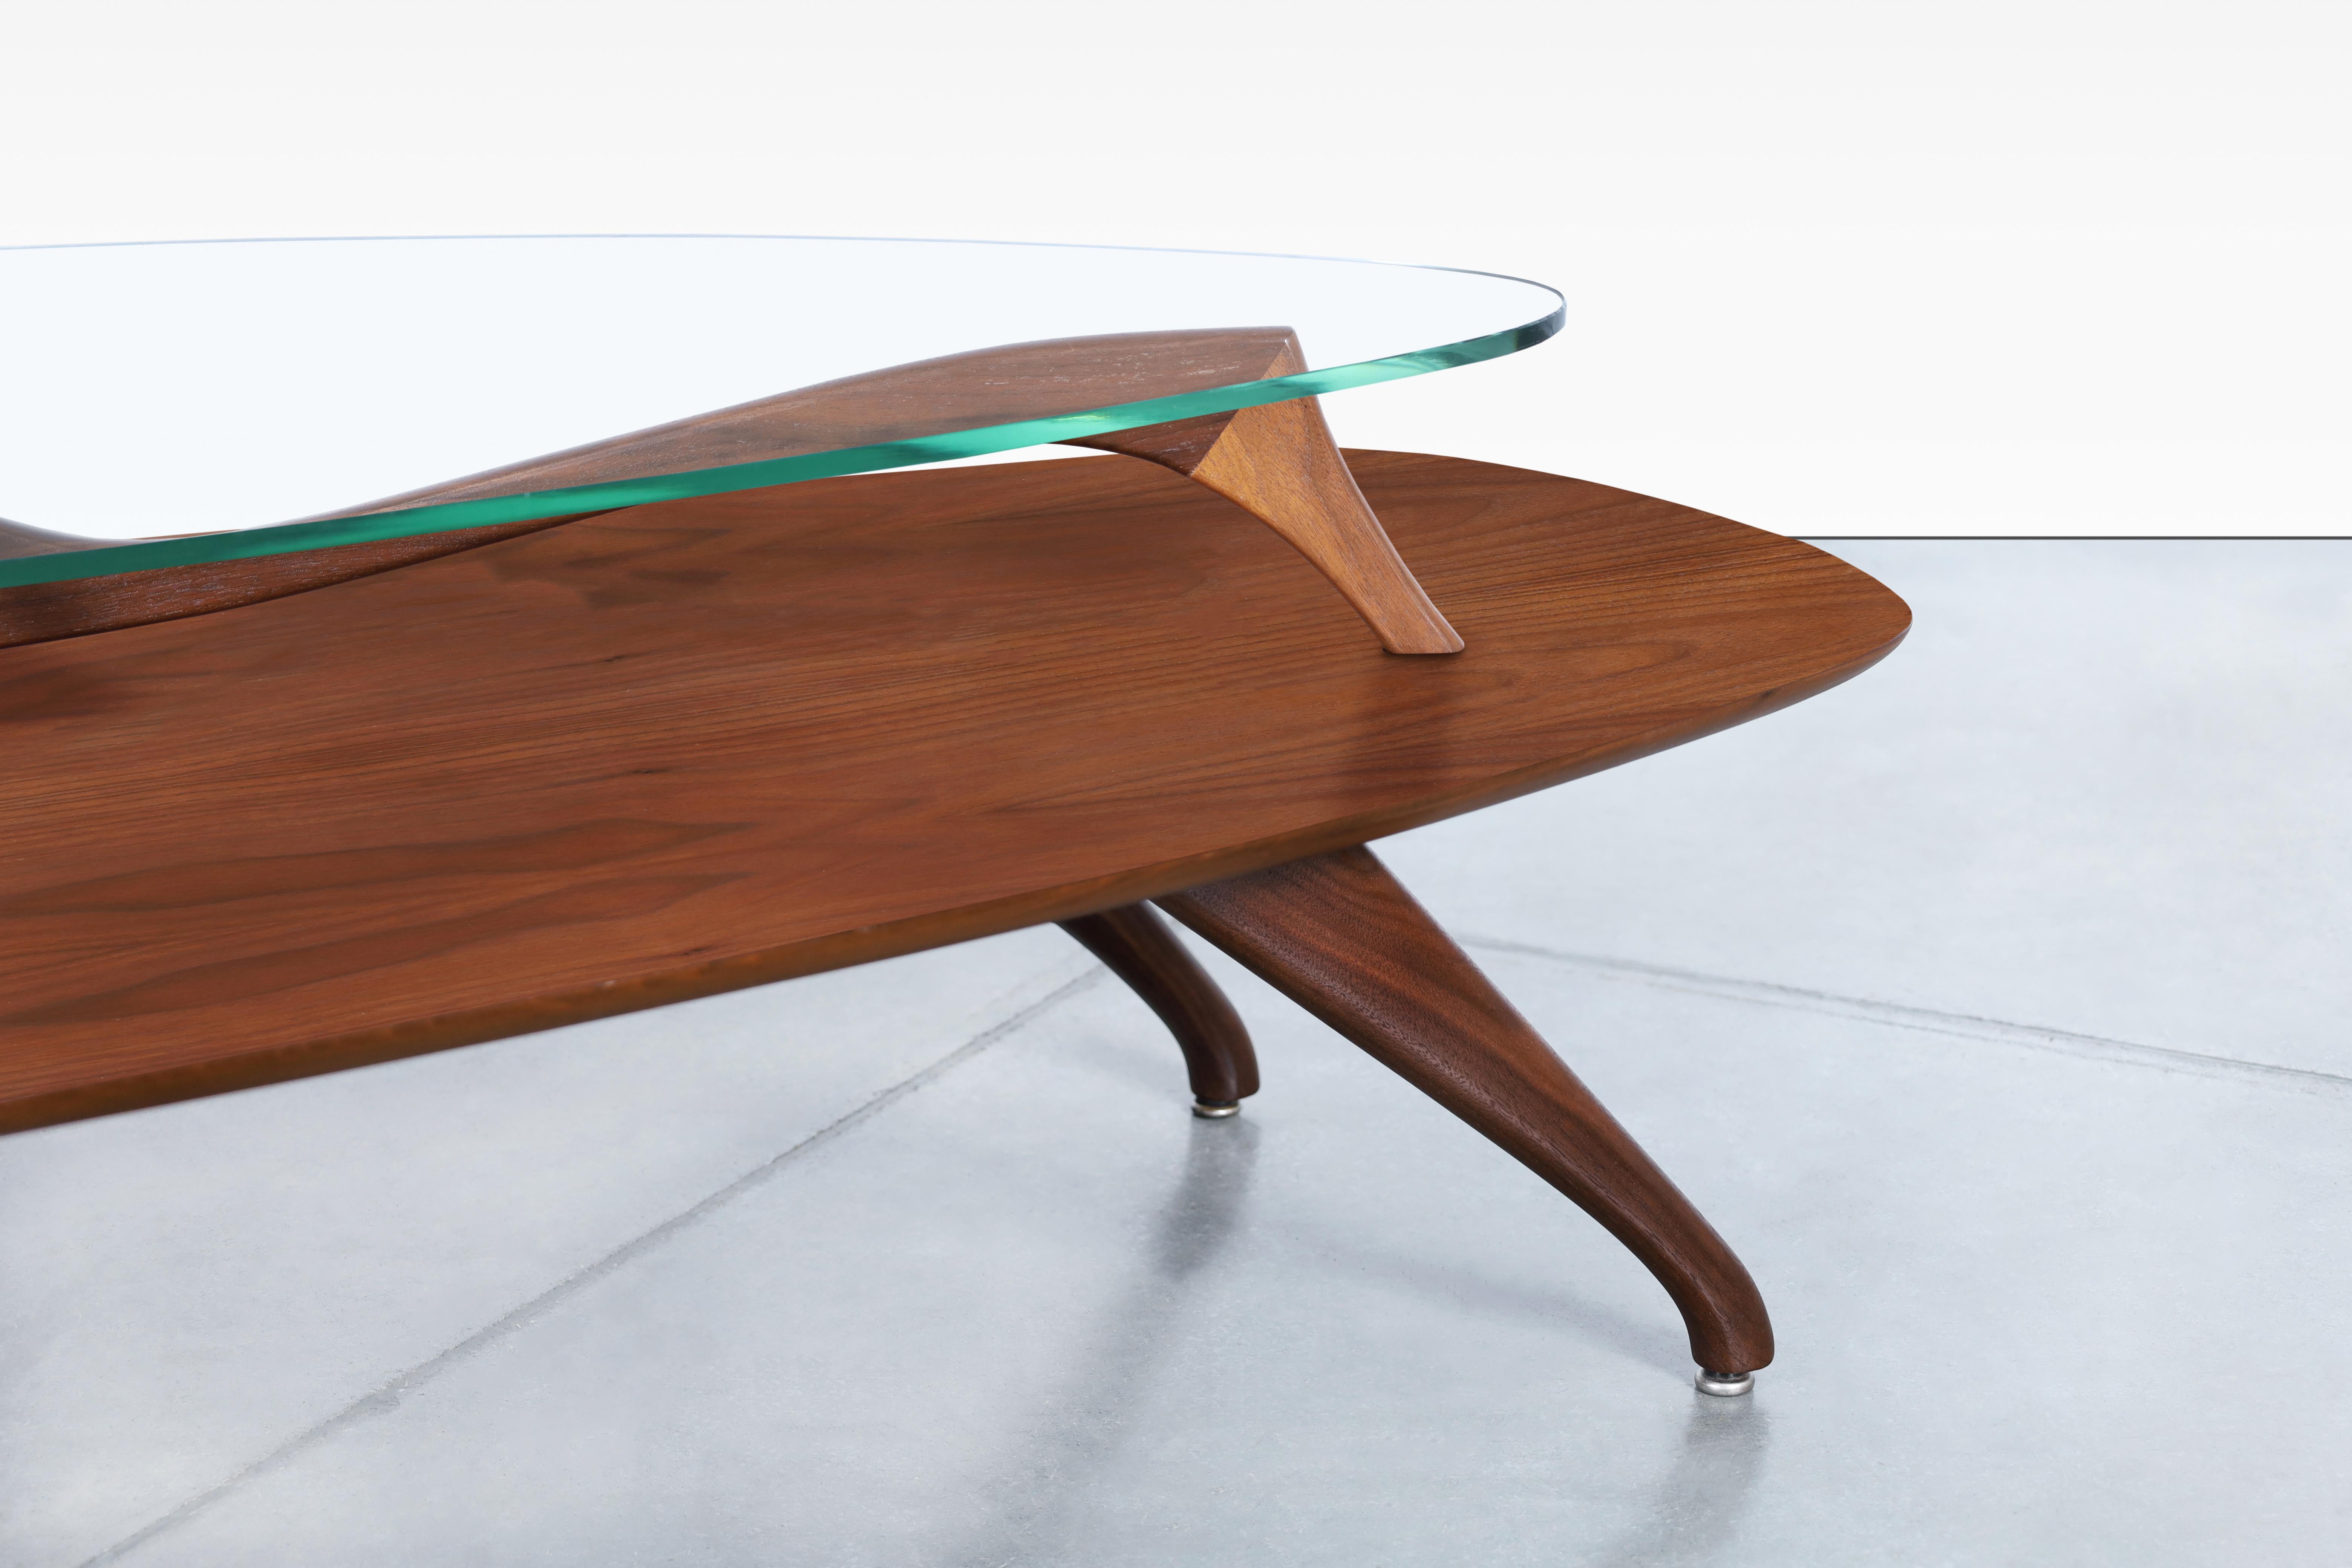 Vintage Sculptural Walnut Coffee Table Styled After Vladimir Kagan For Sale 2